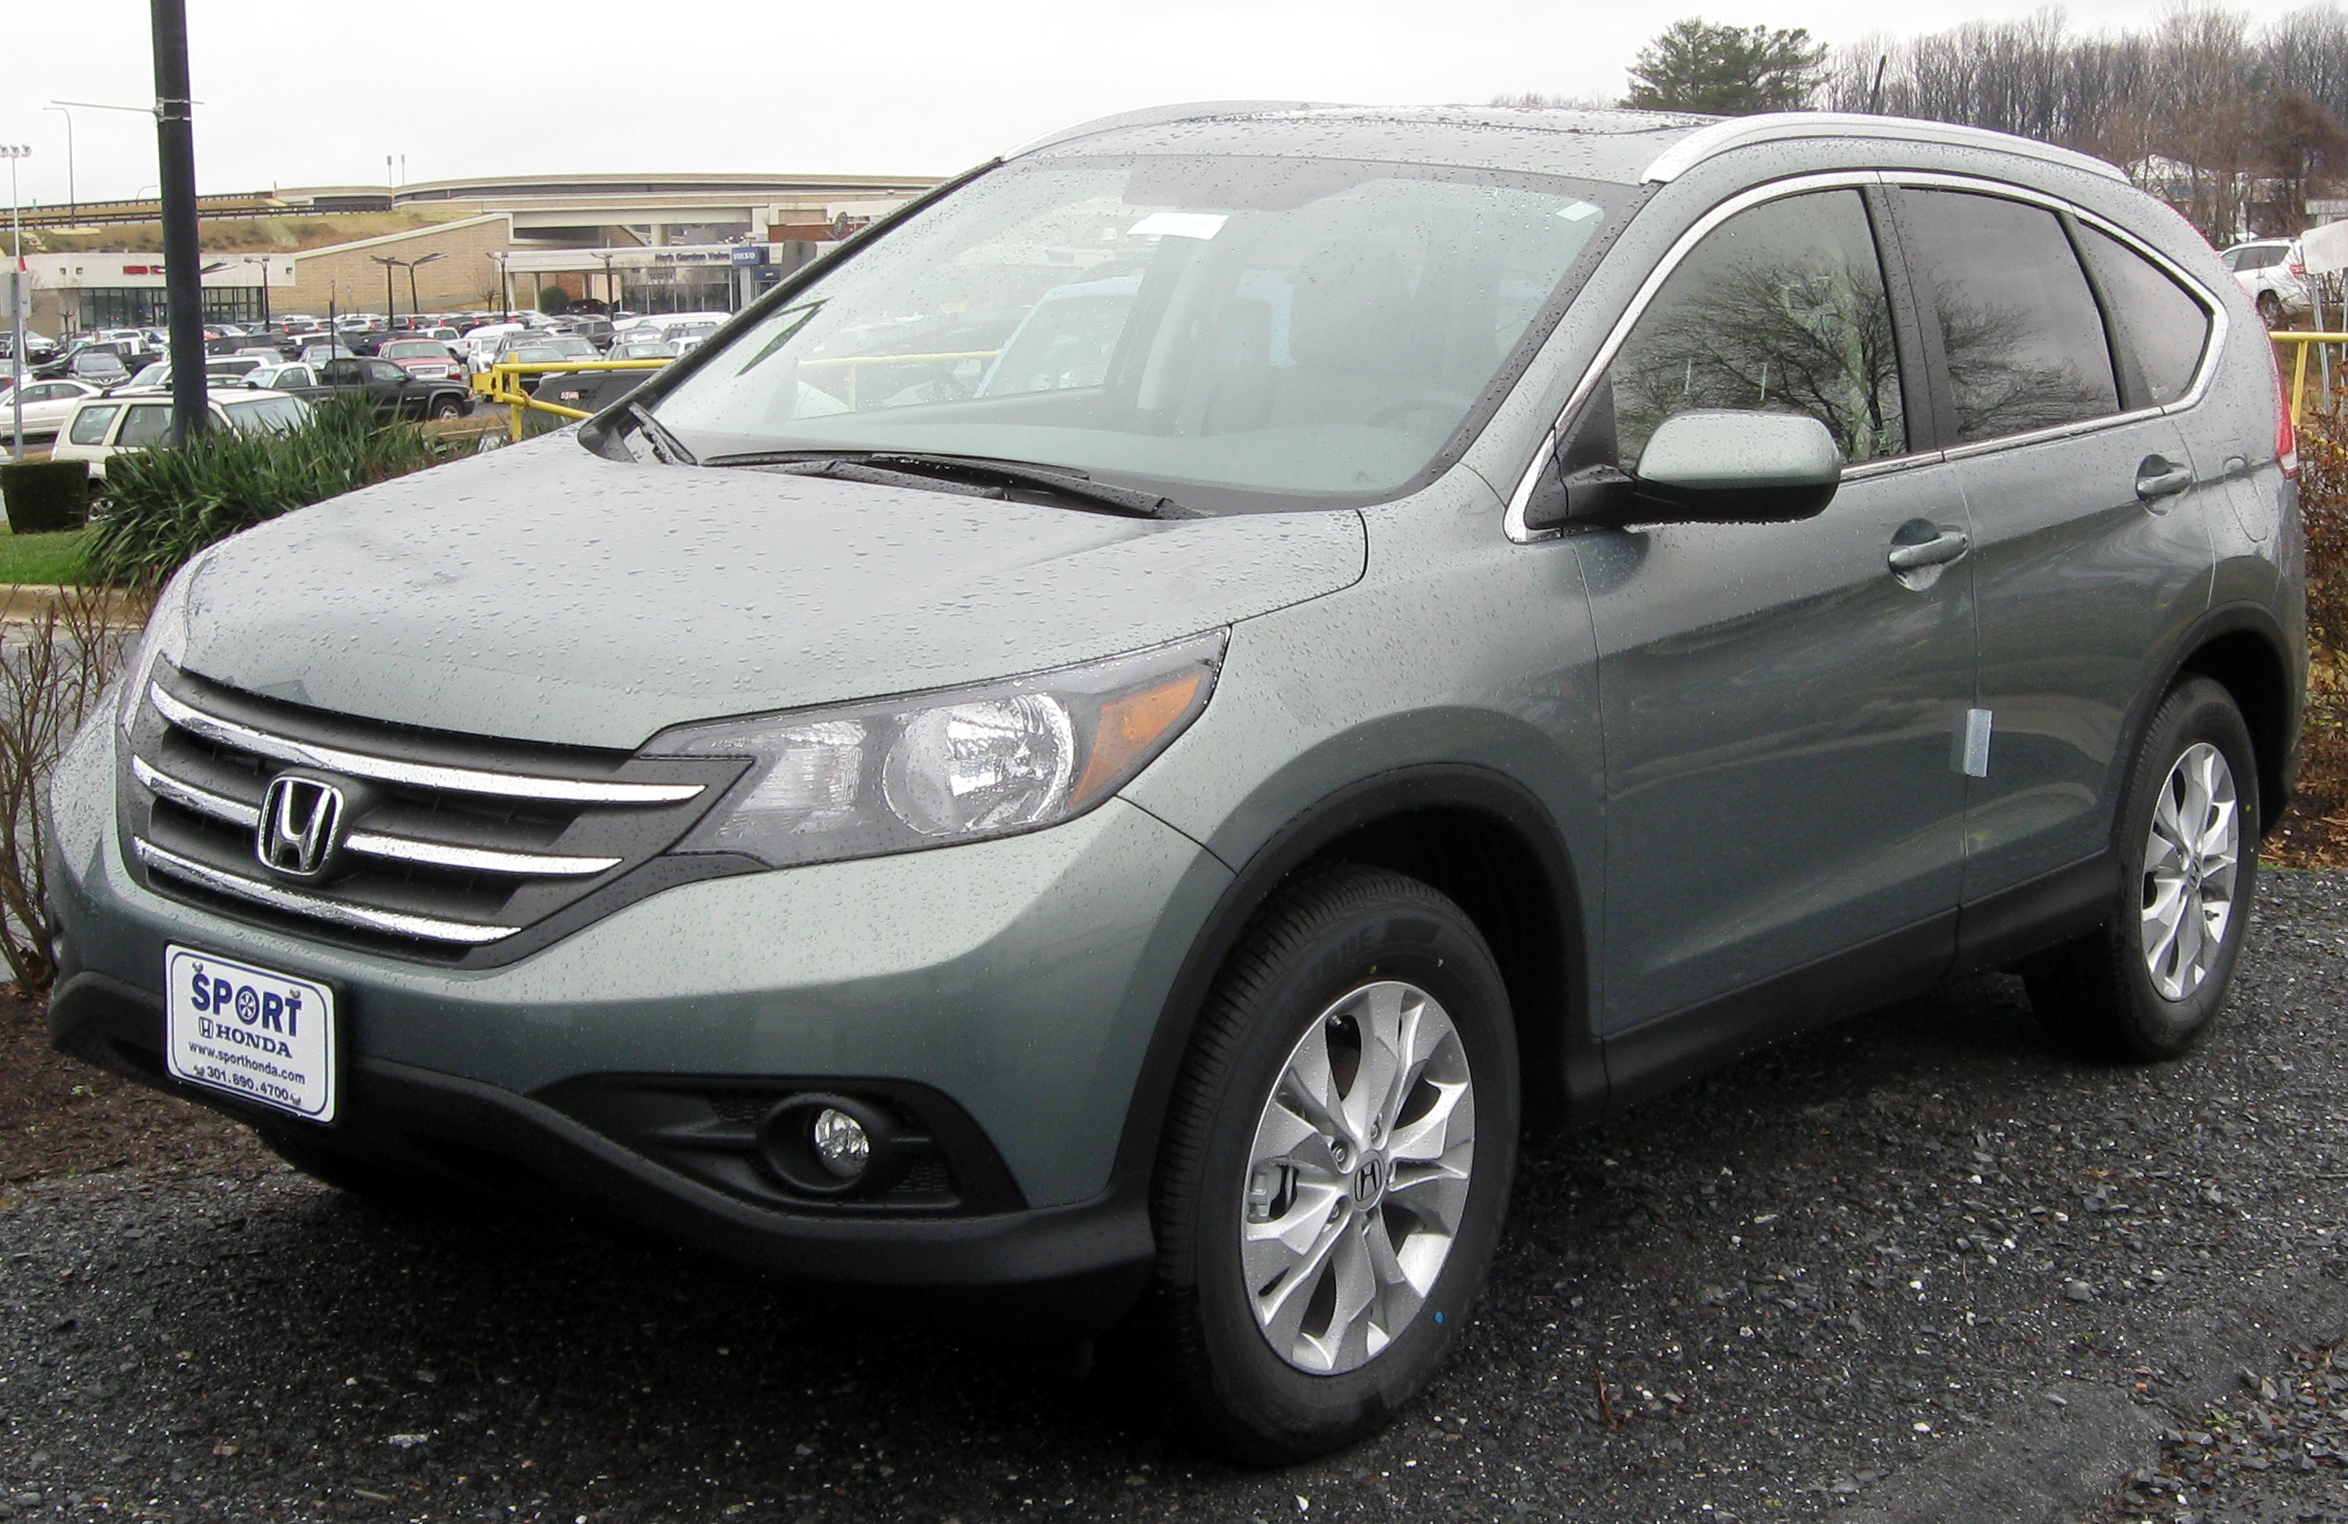 2012 Honda CRV Specifications, Pricing, Pictures and Videos